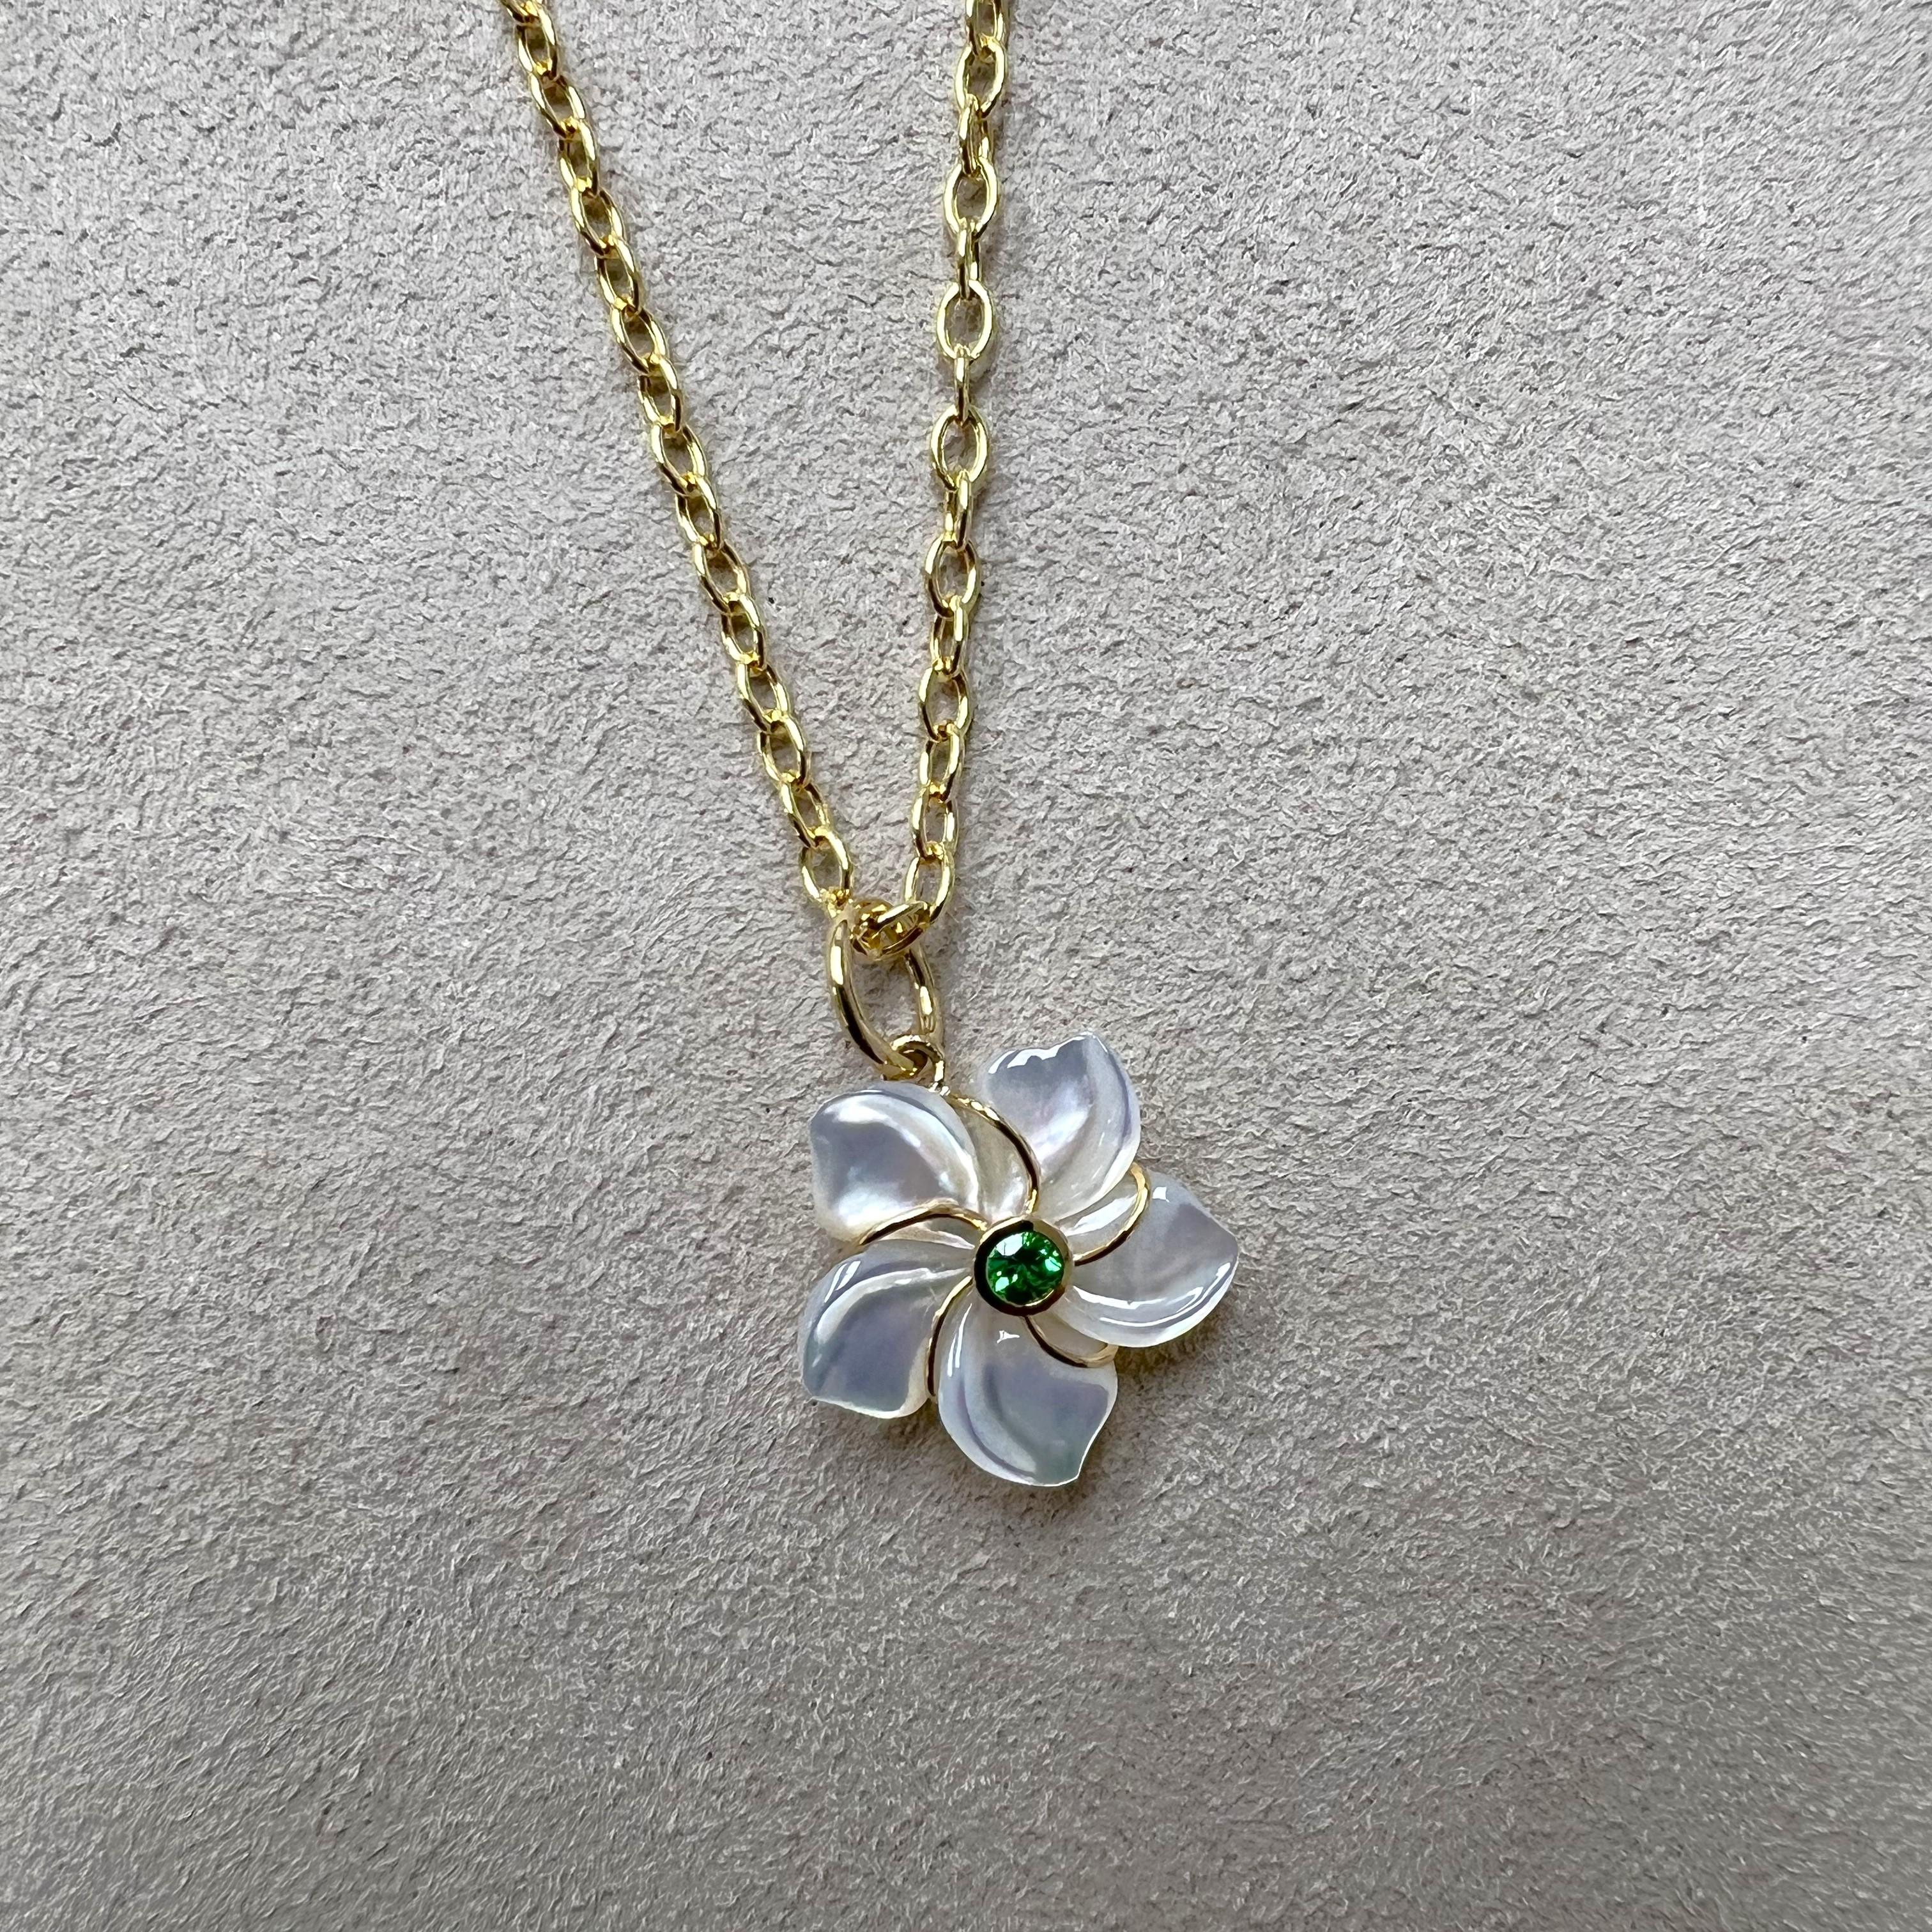 Created in 18 karat yellow gold
Mother of Pearl 3.70 carats approx.
Tsavorite 0.10 carat approx.
Limited edition
Chain sold separately


 About the Designers ~ Dharmesh & Namrata

Drawing inspiration from little things, Dharmesh & Namrata Kothari